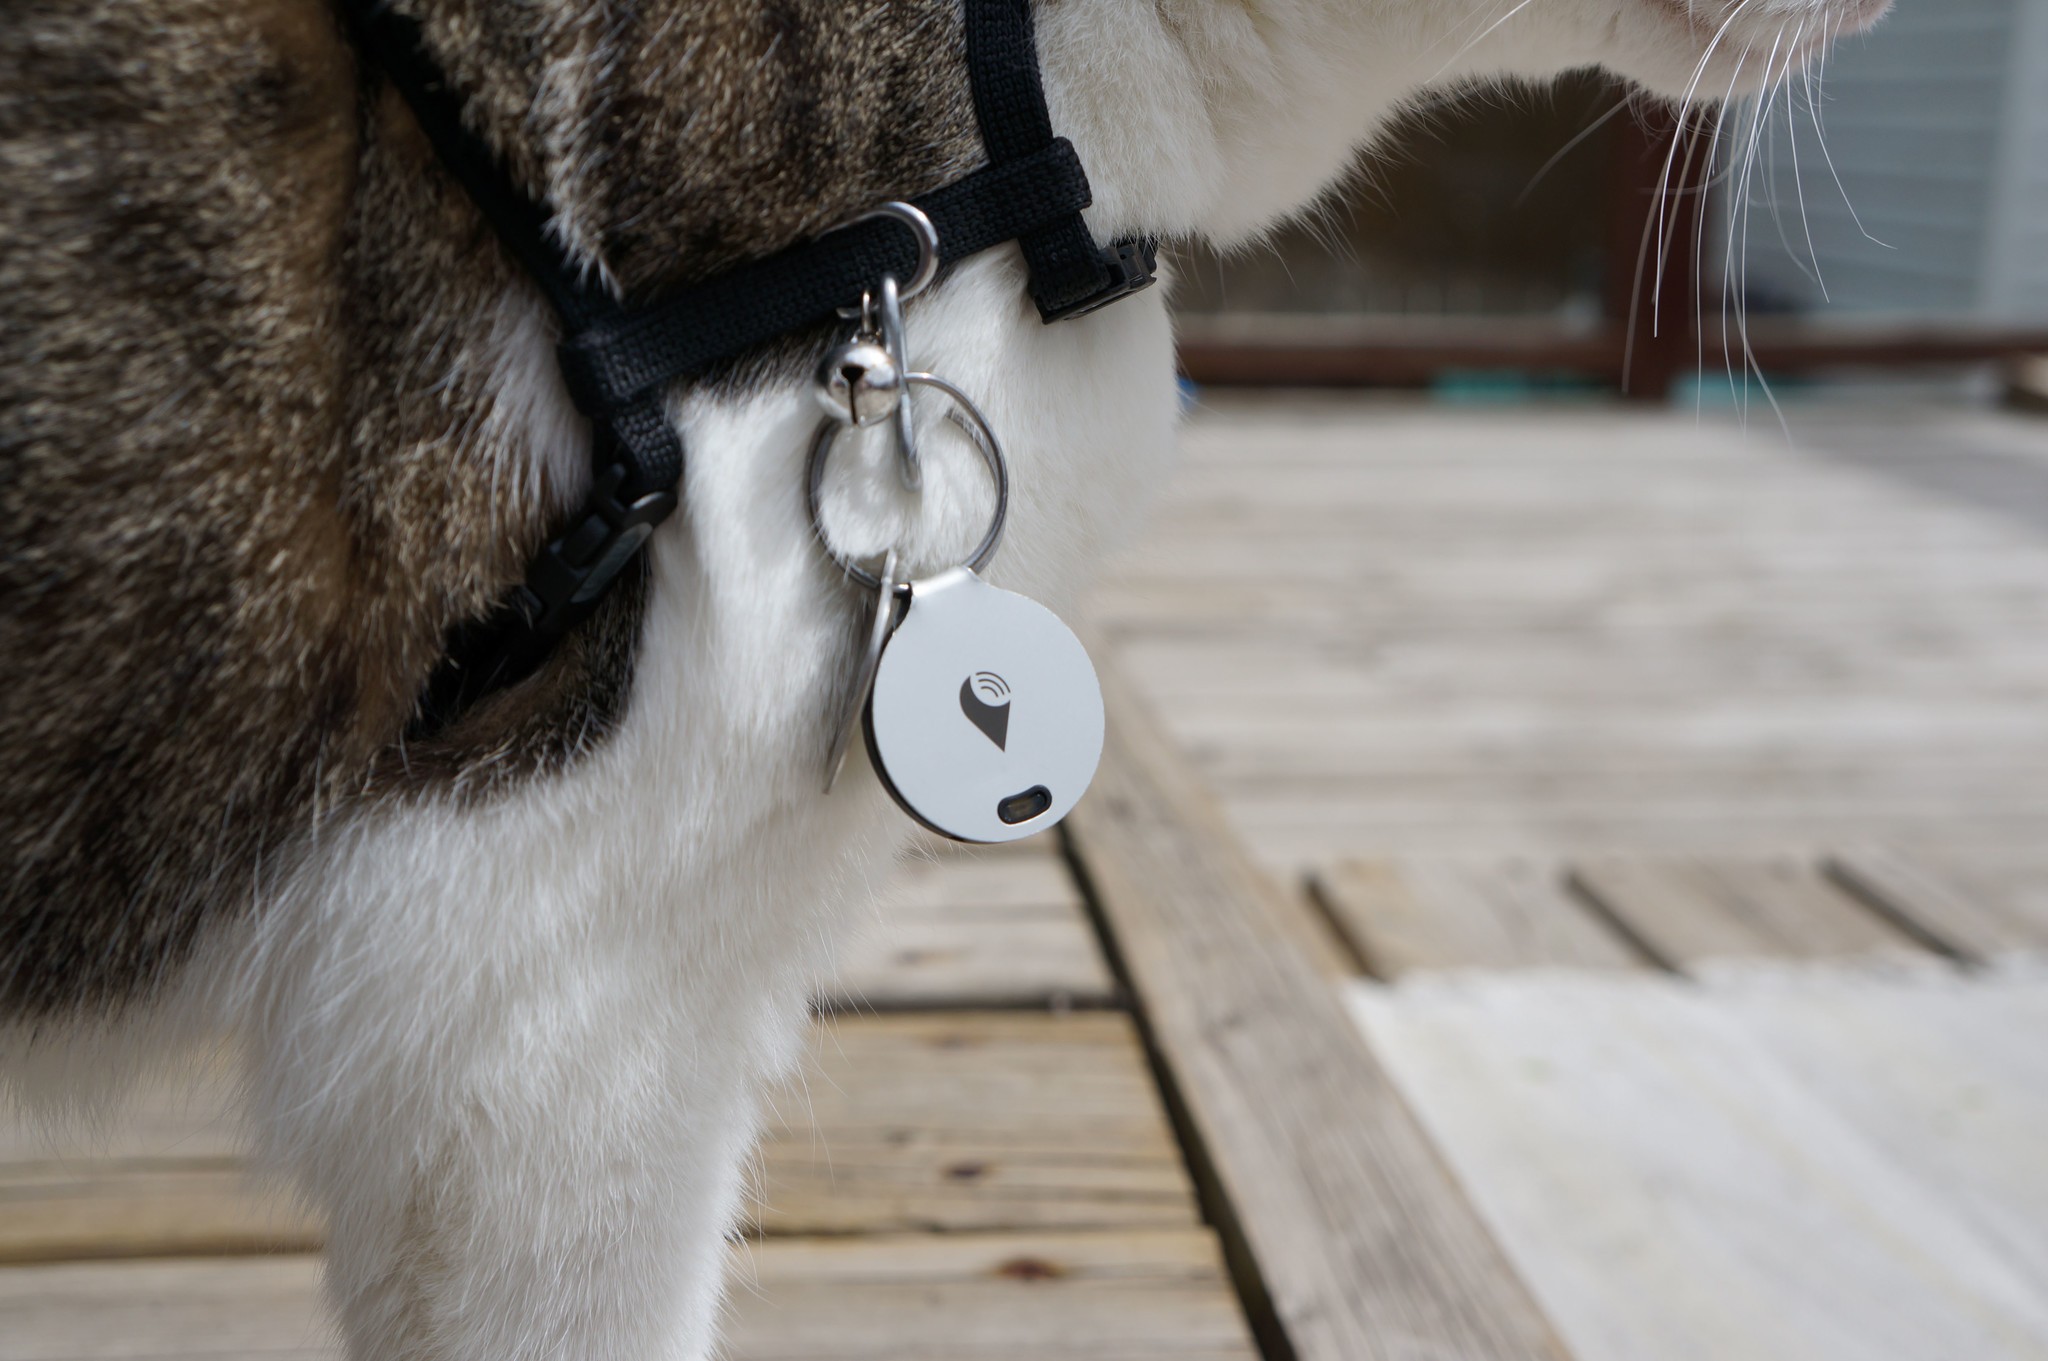 Tracking your pet with TrackR creates a false sense of security